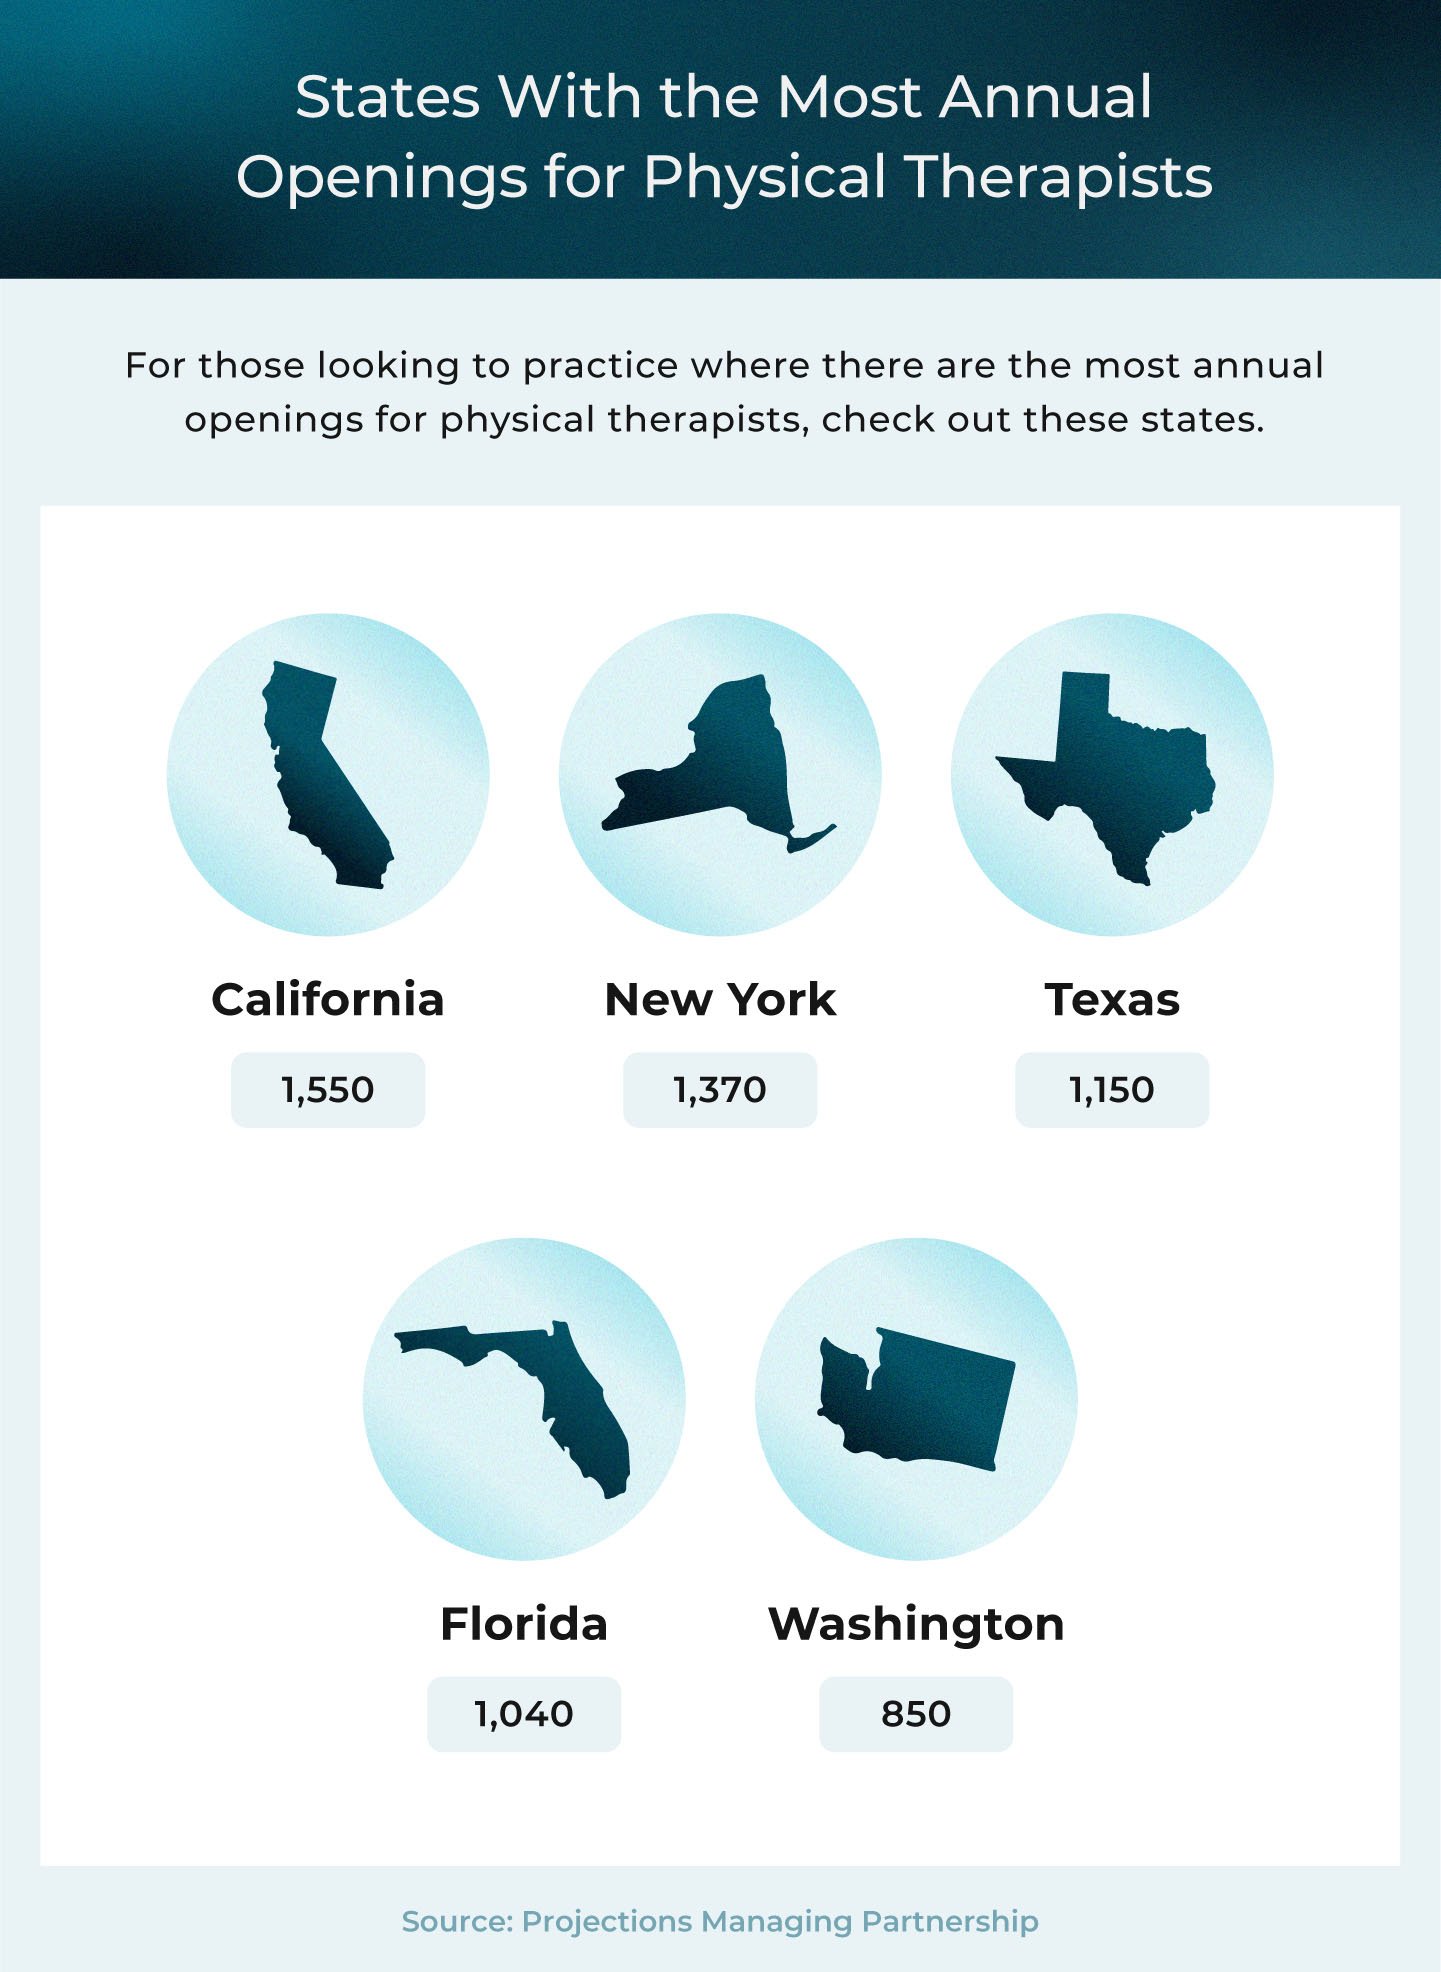 The states with the most annual openings for physical therapists based on occupational projections data.